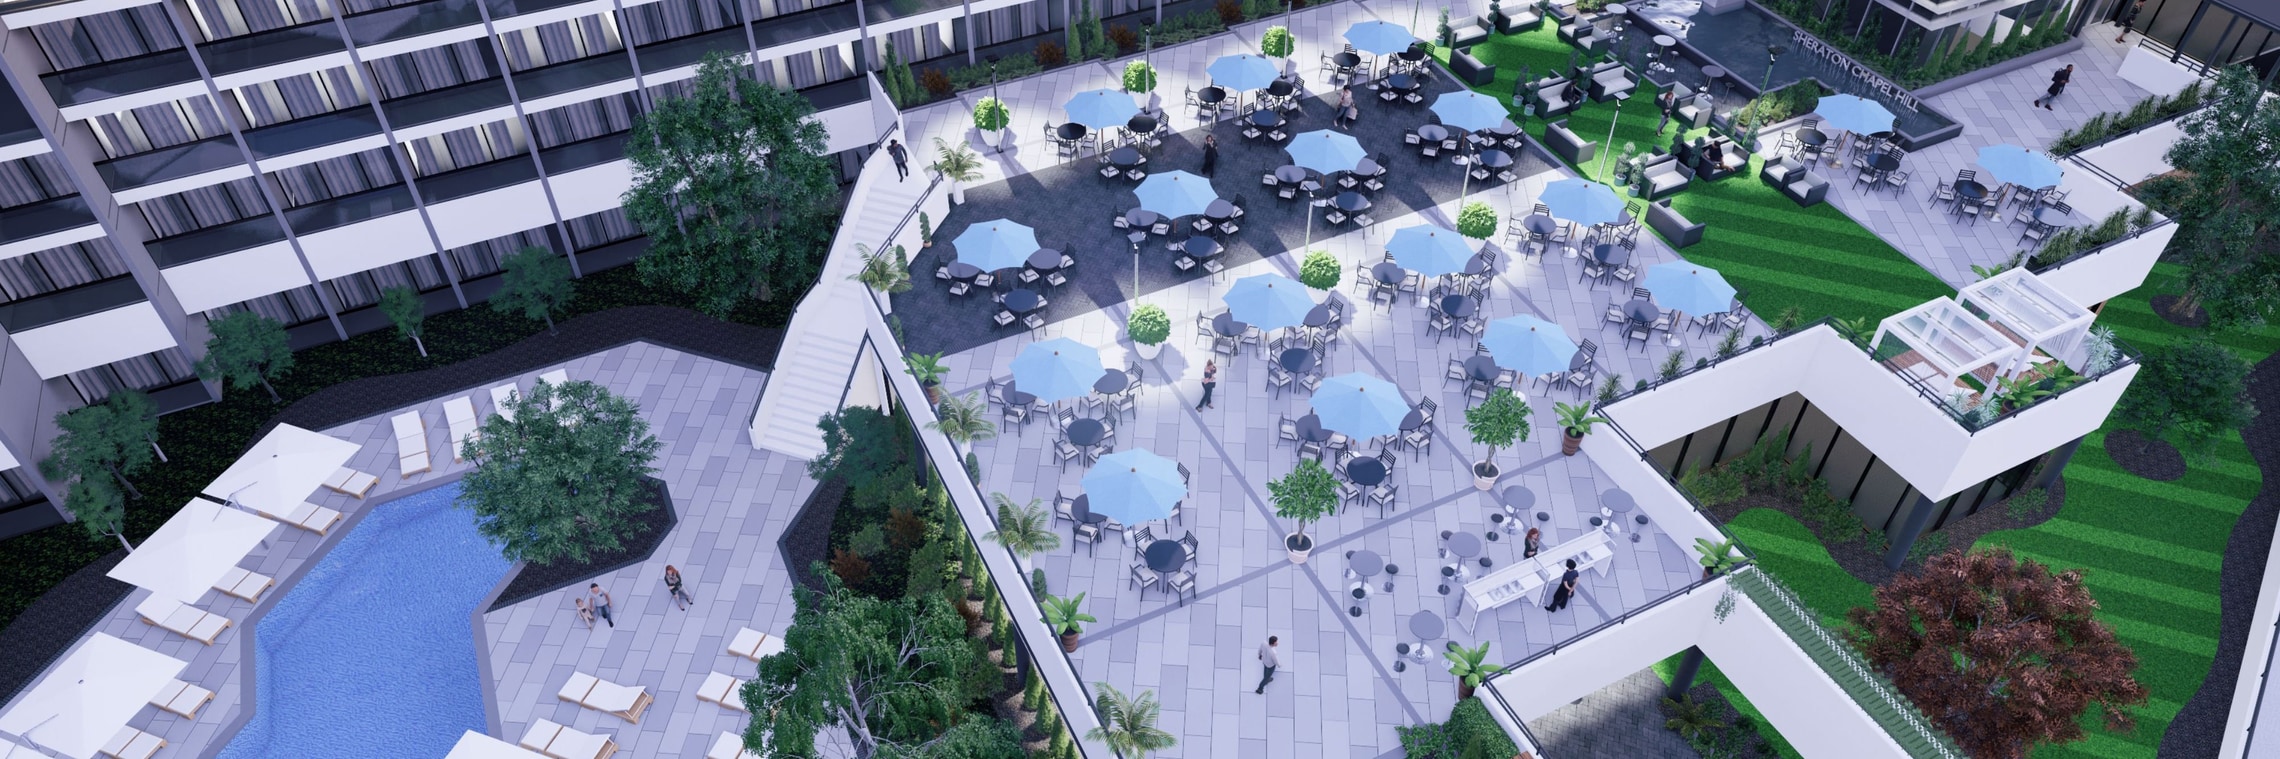 Event Deck and Outdoor Pool